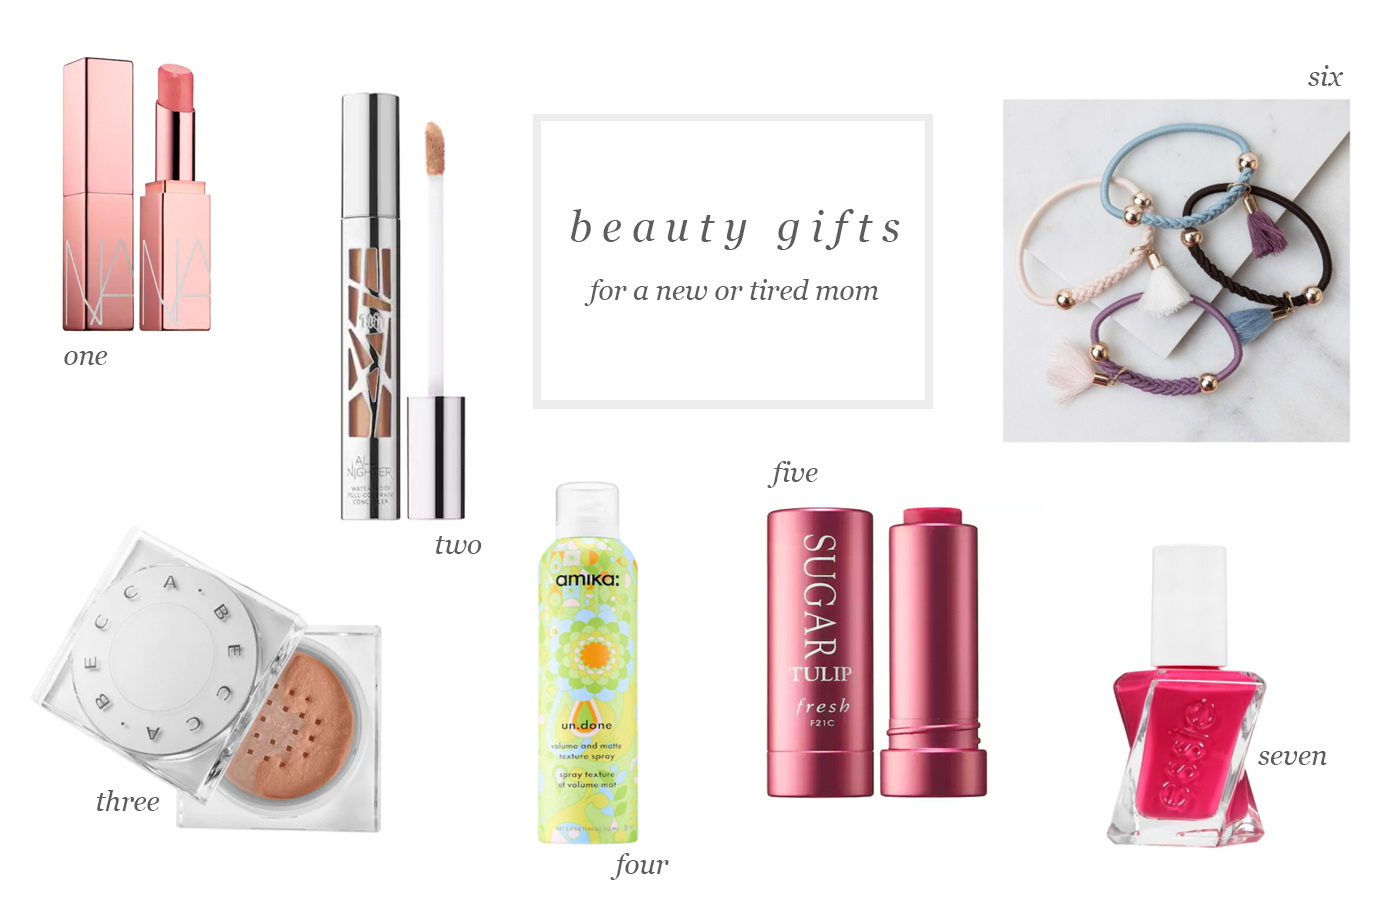 Beauty gifts for a new/tired mom